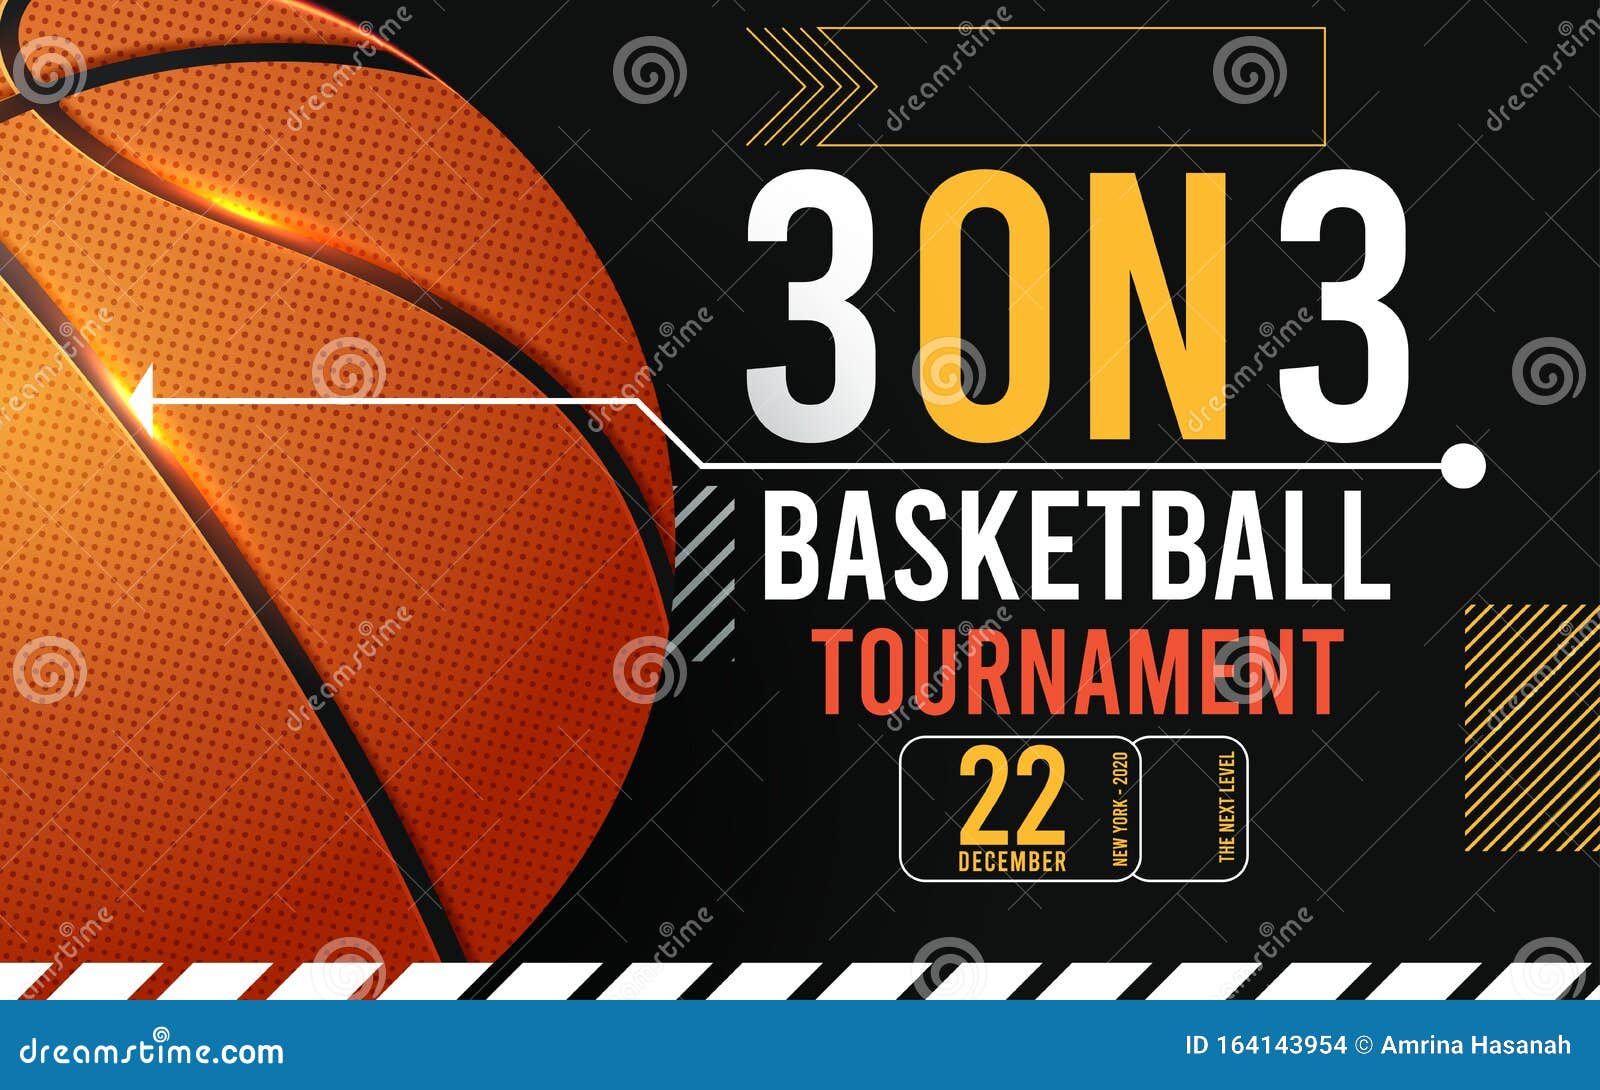 Design for Basketball. Poster for the Tournament. Vector In 3 On 3 Basketball Tournament Flyer Template